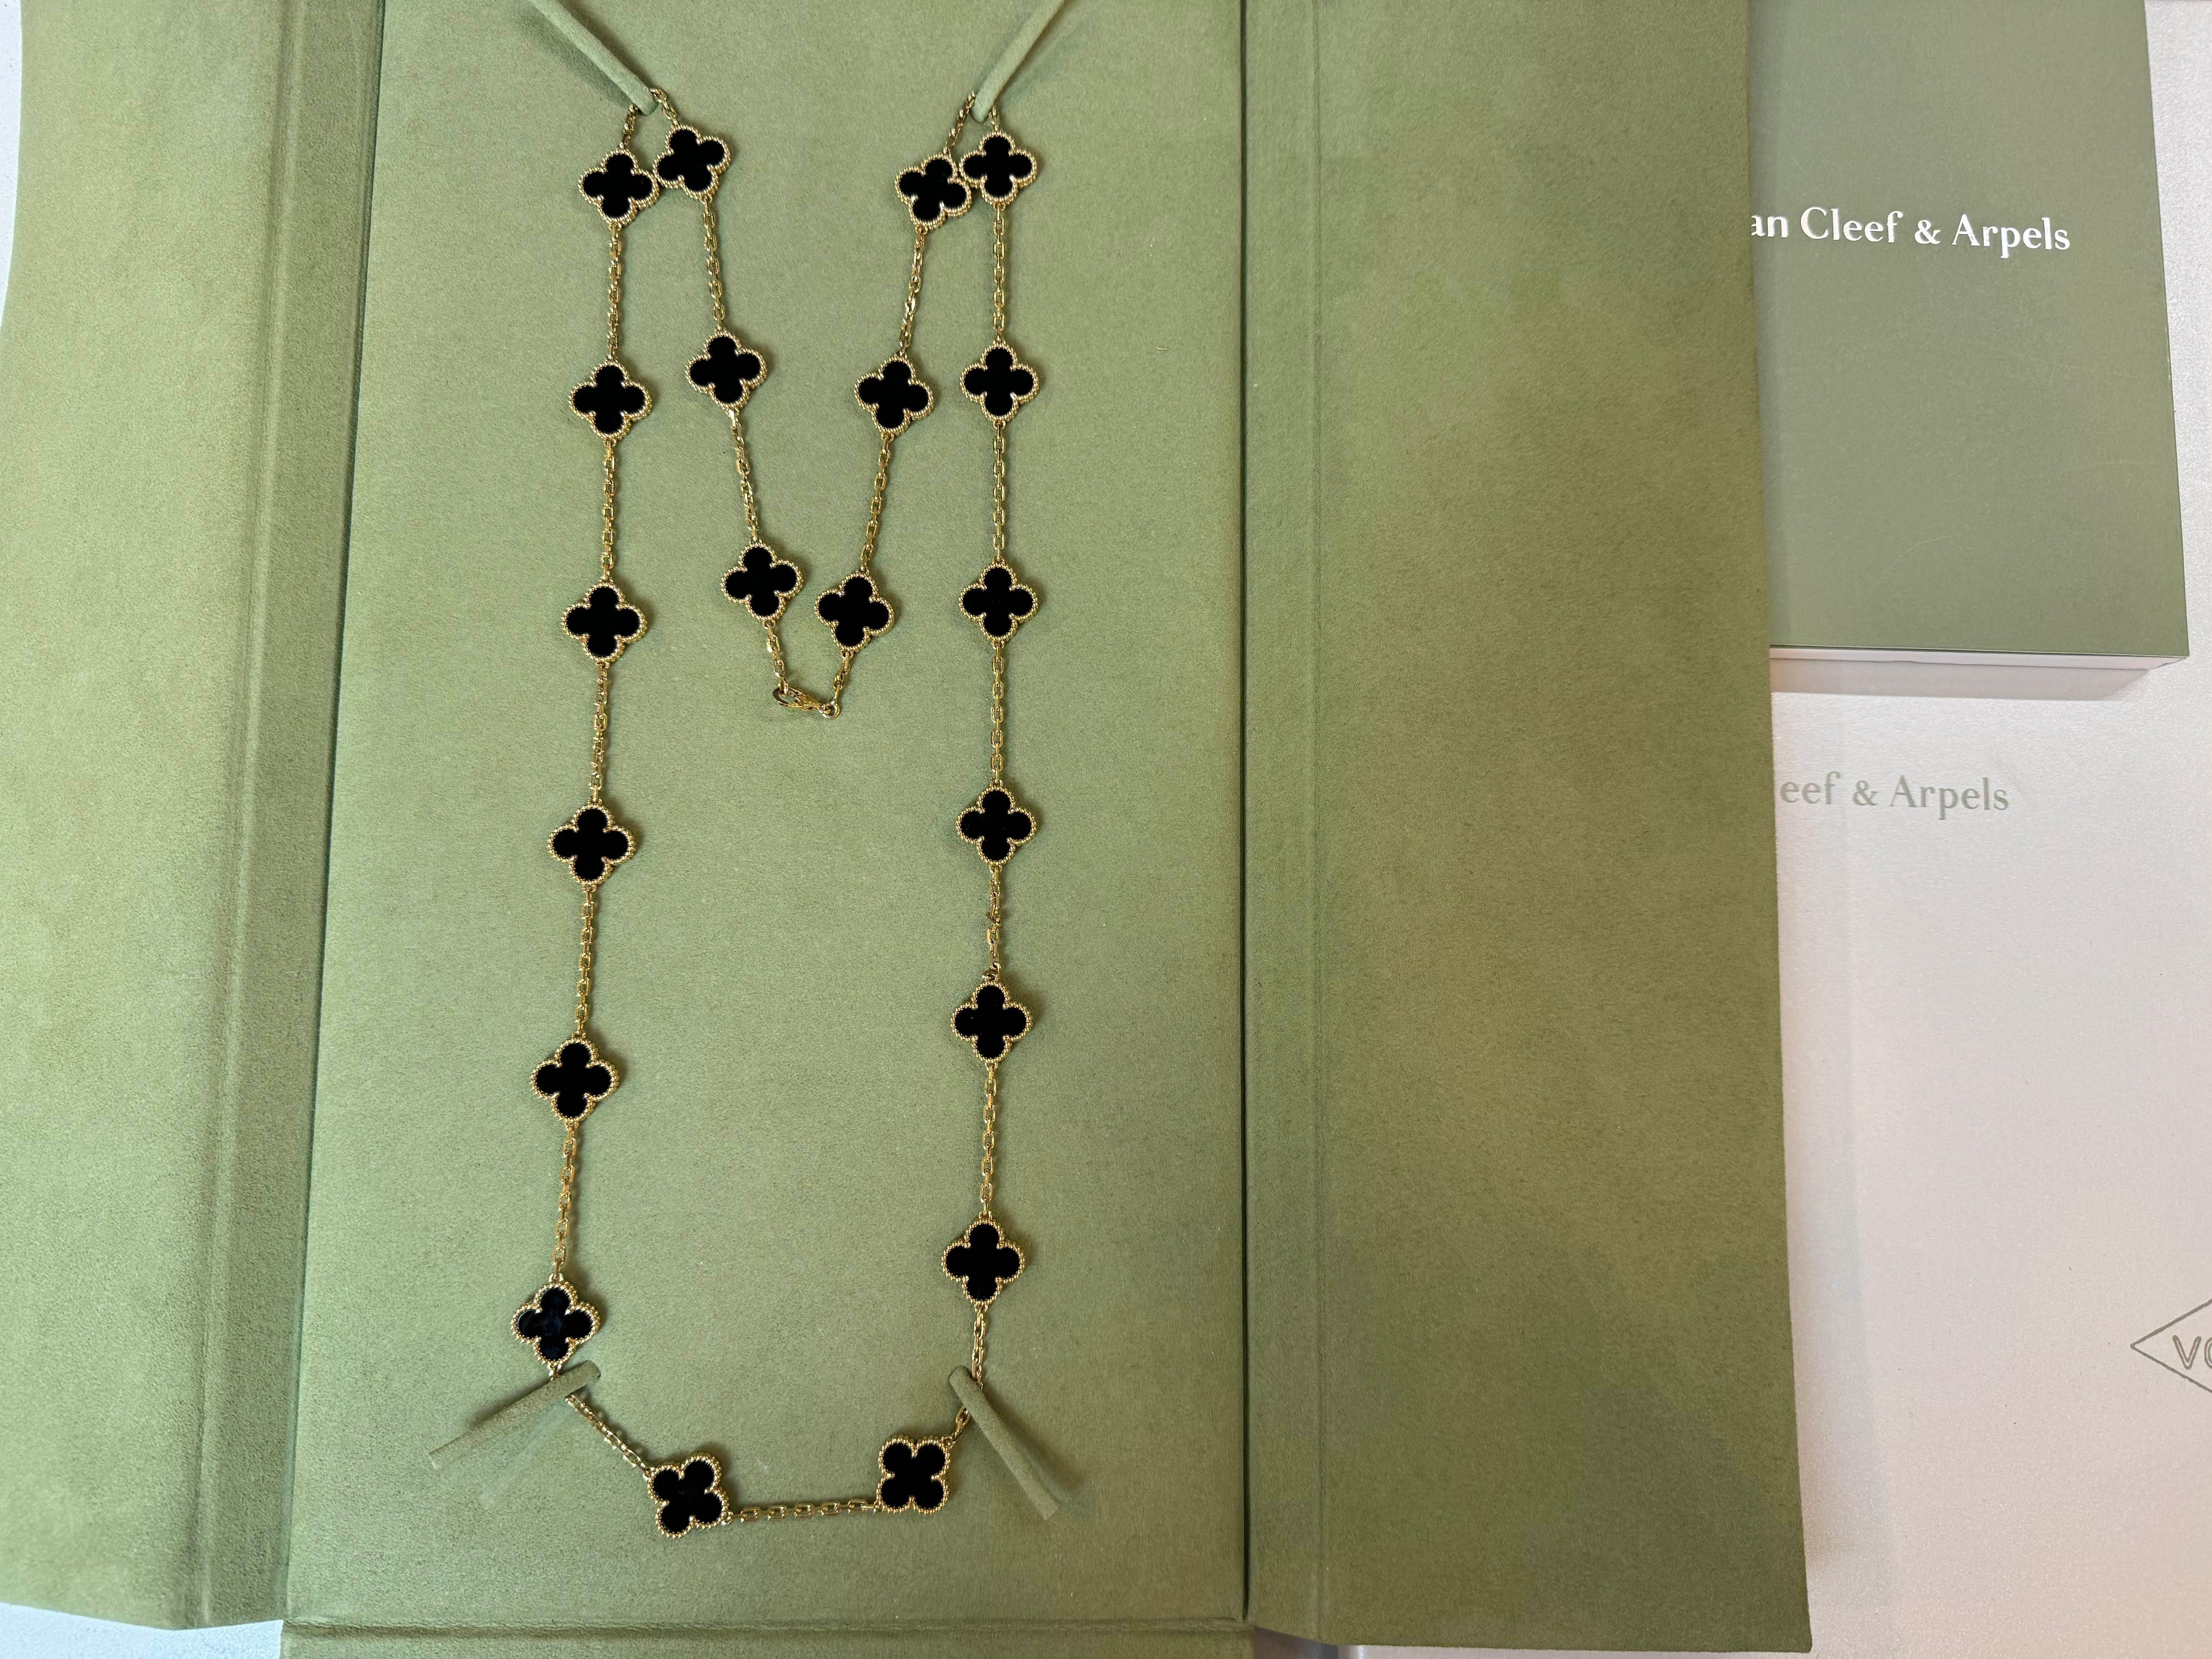 Vintage Alhambra 20 motifs Onyx necklace from the Alhambra series. Hard to score at the boutique. Can be worn as a long necklace or double-tour for a chocker style.
Maker: Van Cleef & Arpels
Accessories: Boxes, the original certificate dated